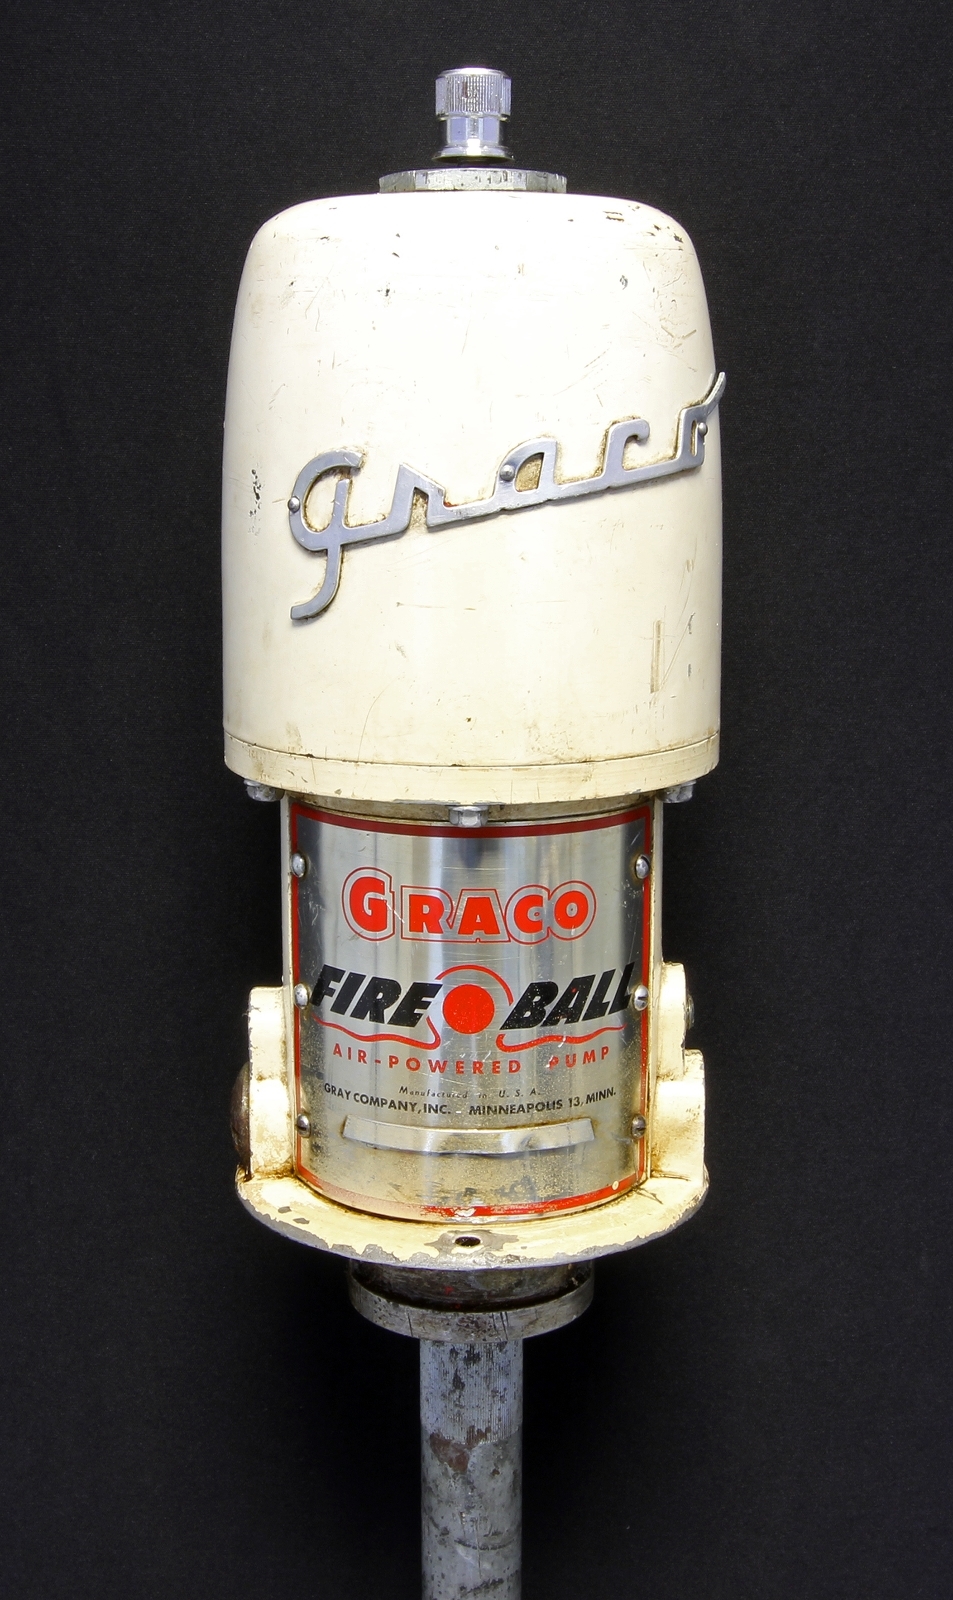 Vintage 1956 Graco Fire-Ball grease and oil lubrication pump